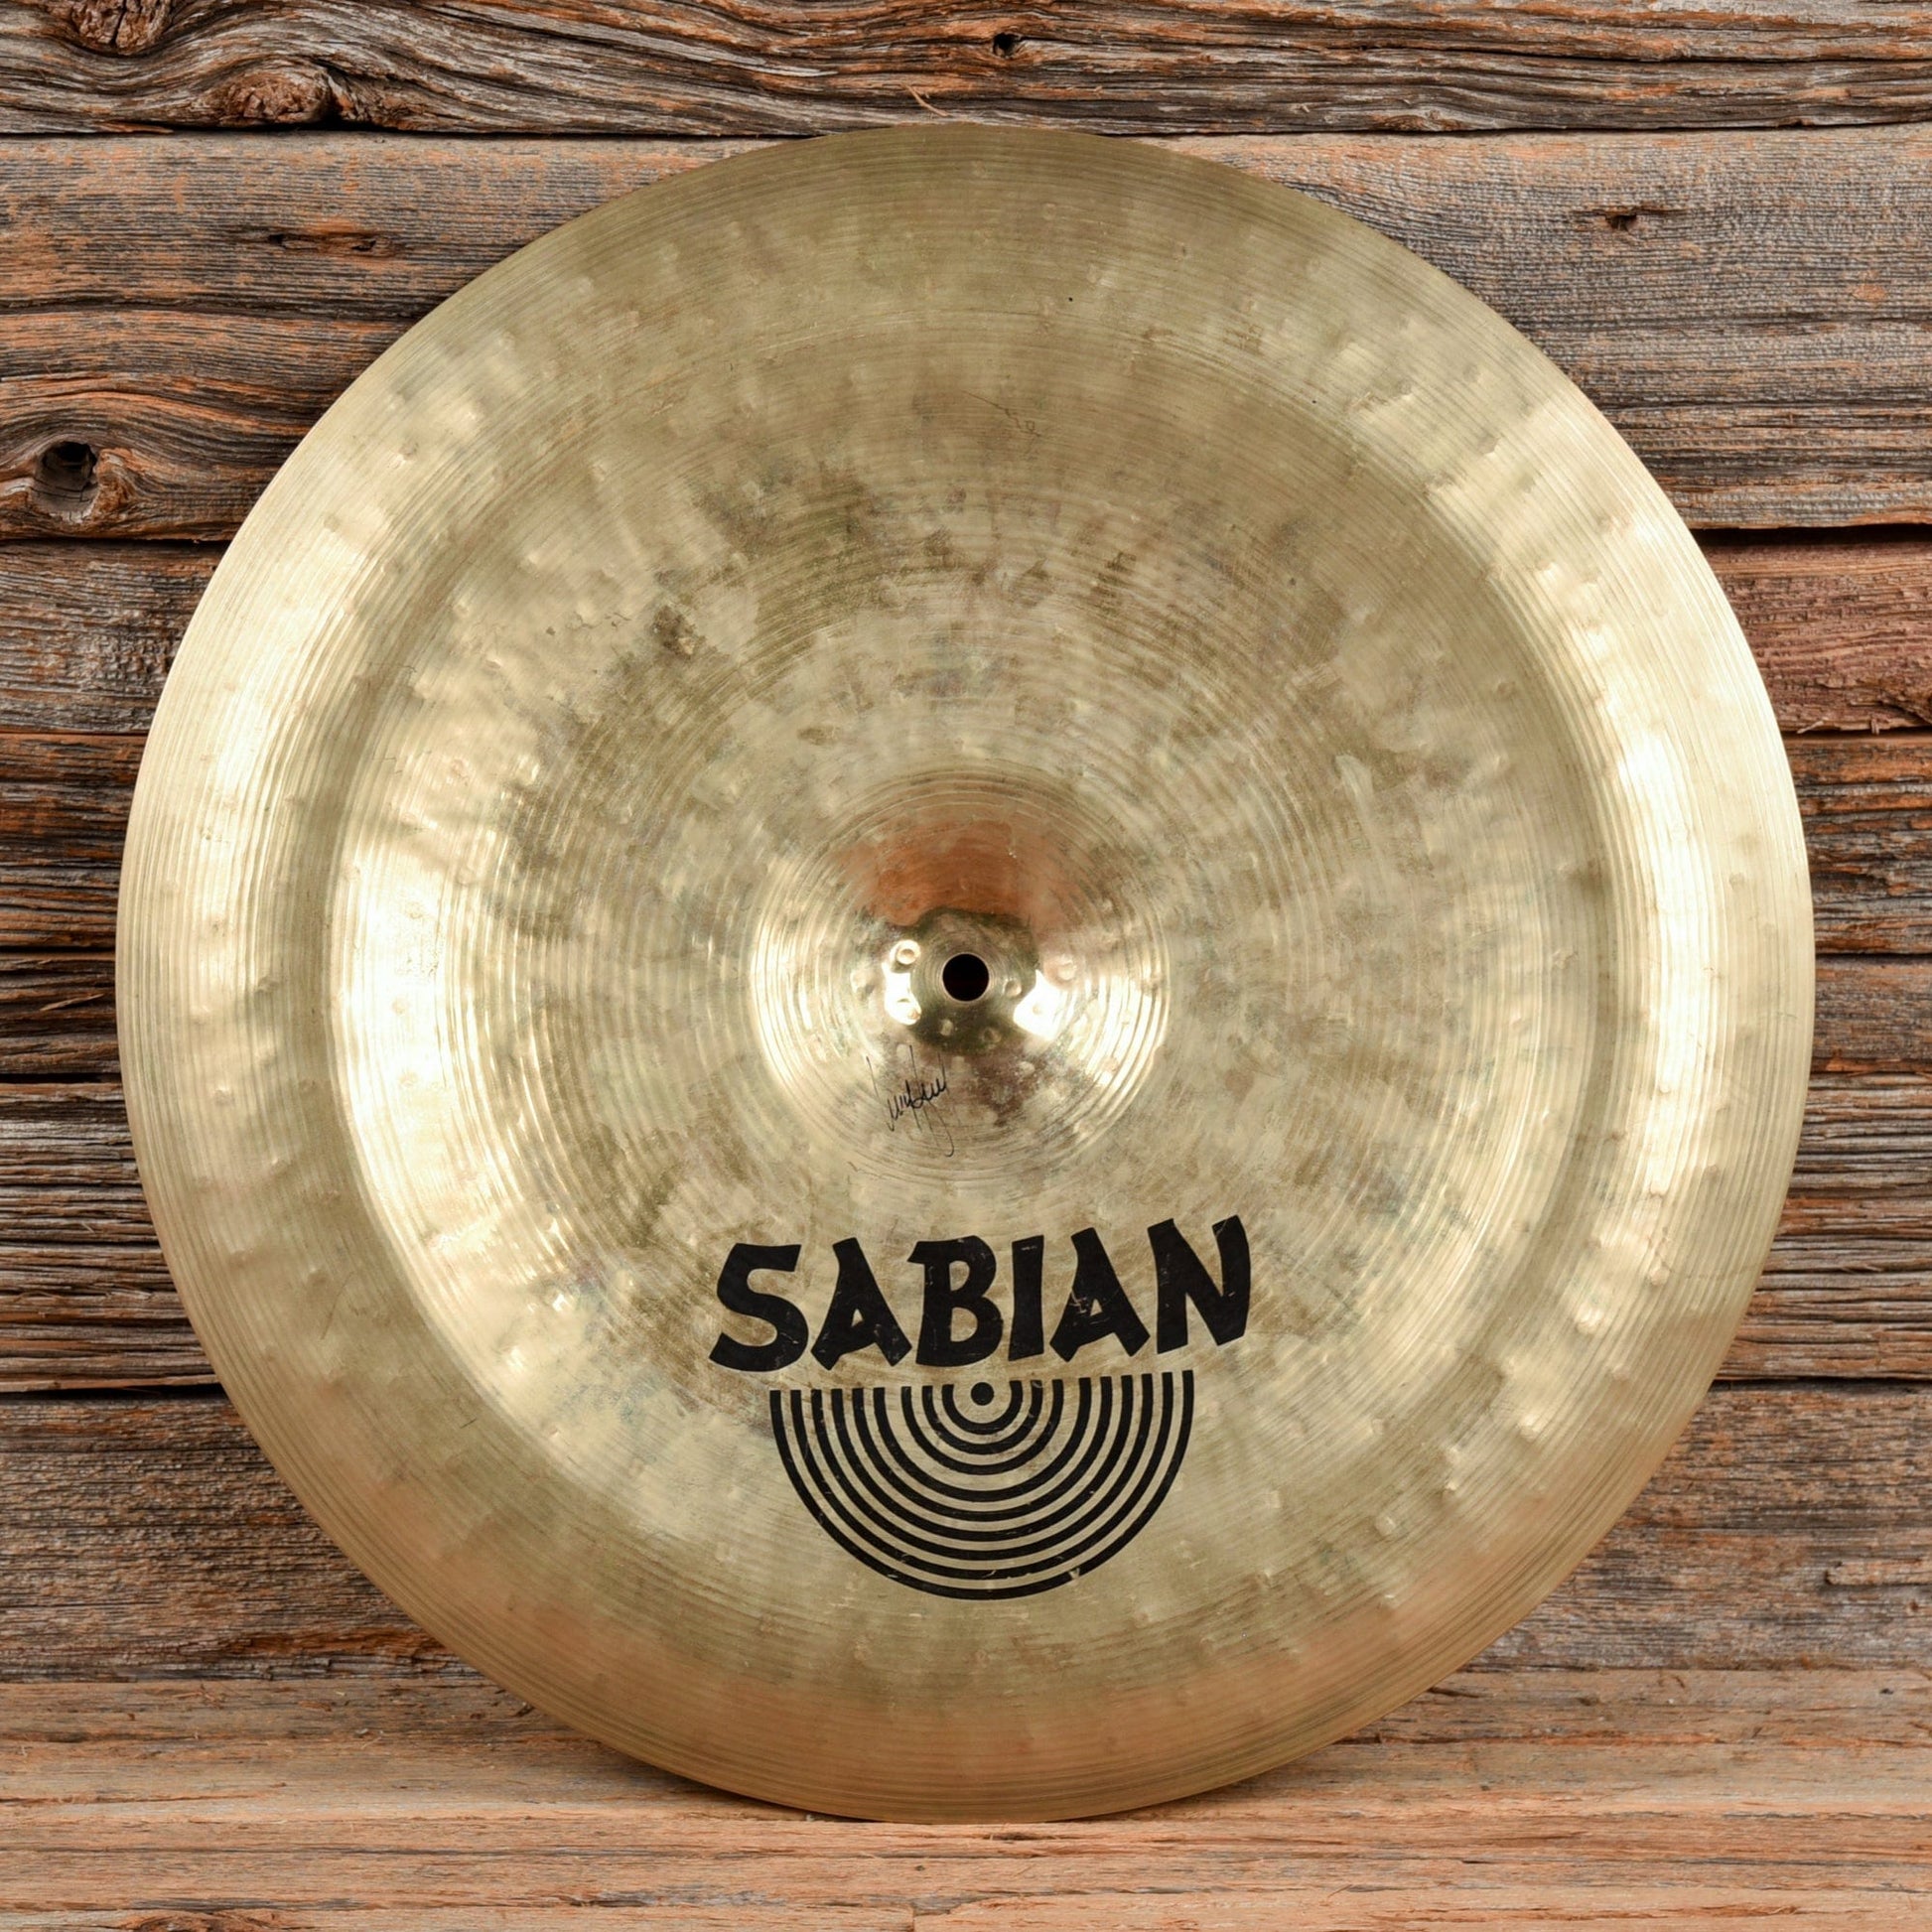 Sabian 18" Hand Hammered HH Thin Chinese Cymbal USED Drums and Percussion